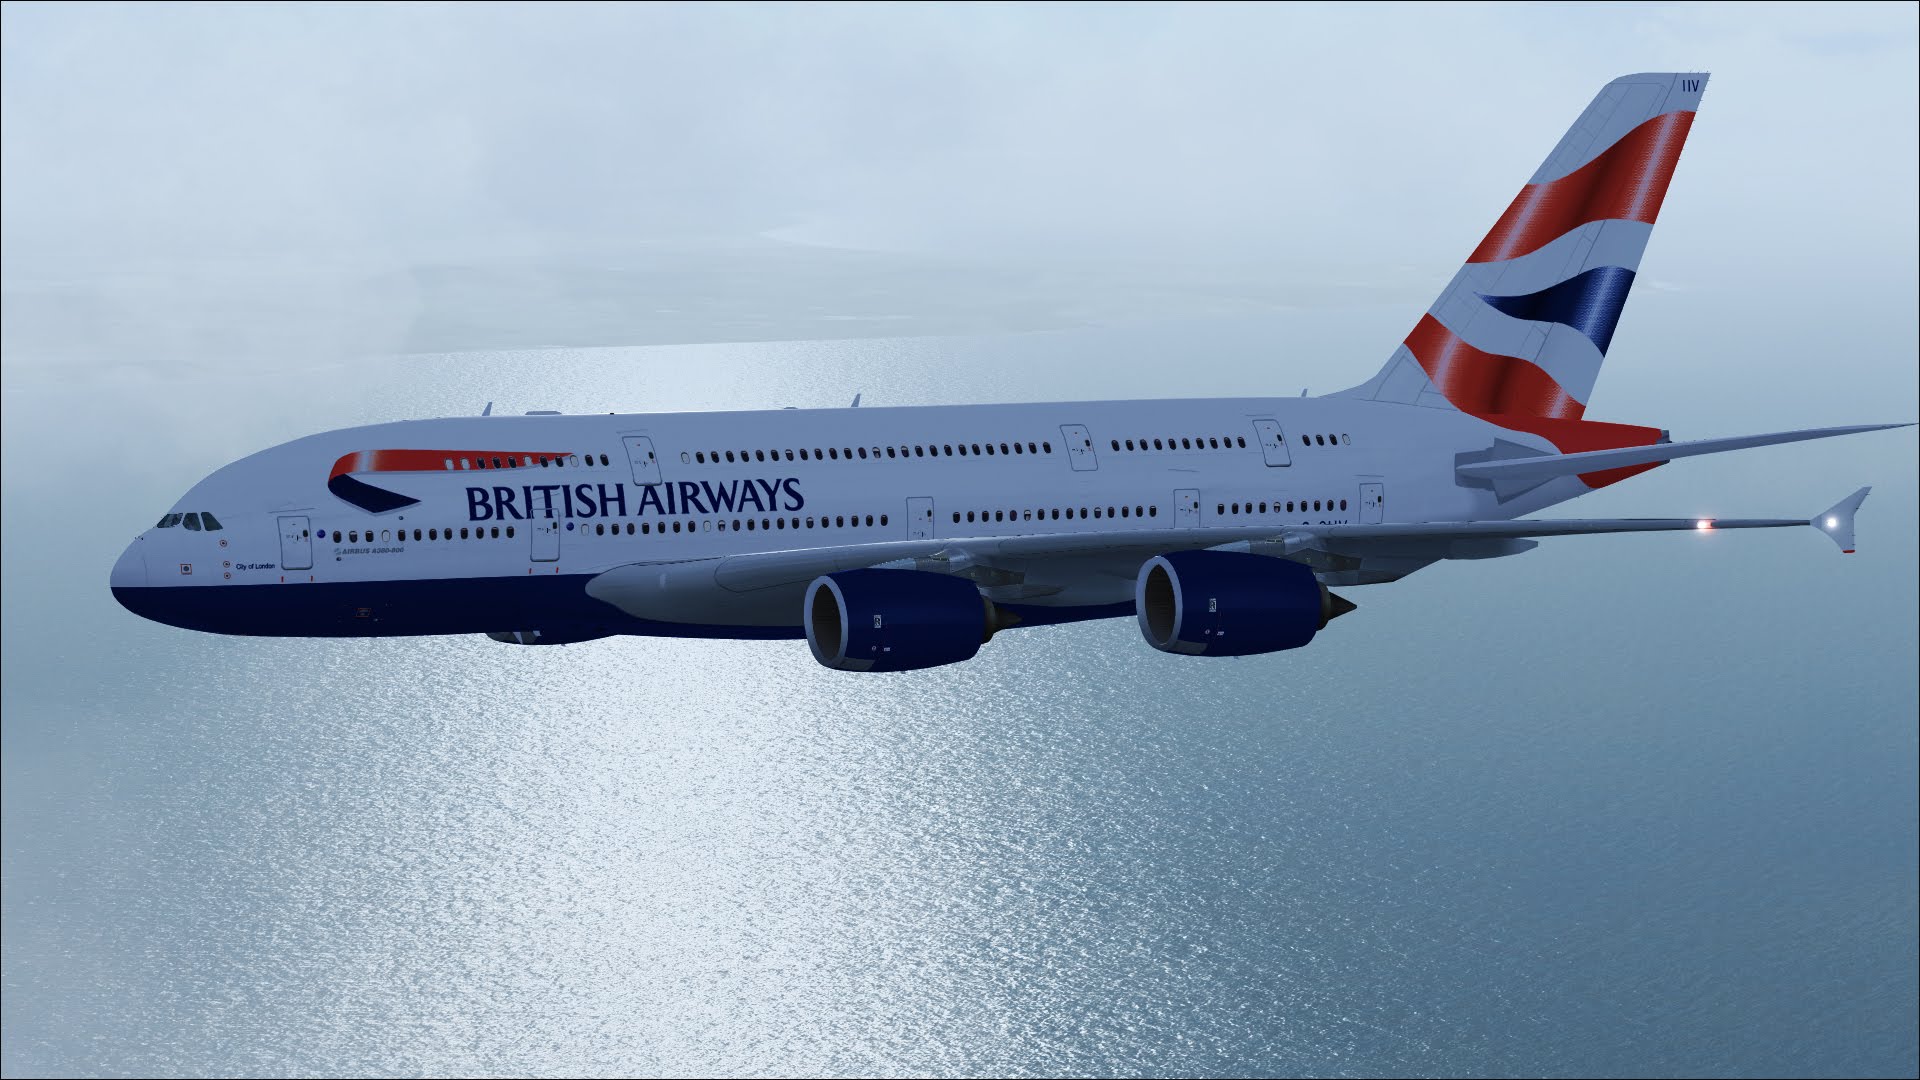 Airbus A380 British Airways plane flying over the ocean wallpaper